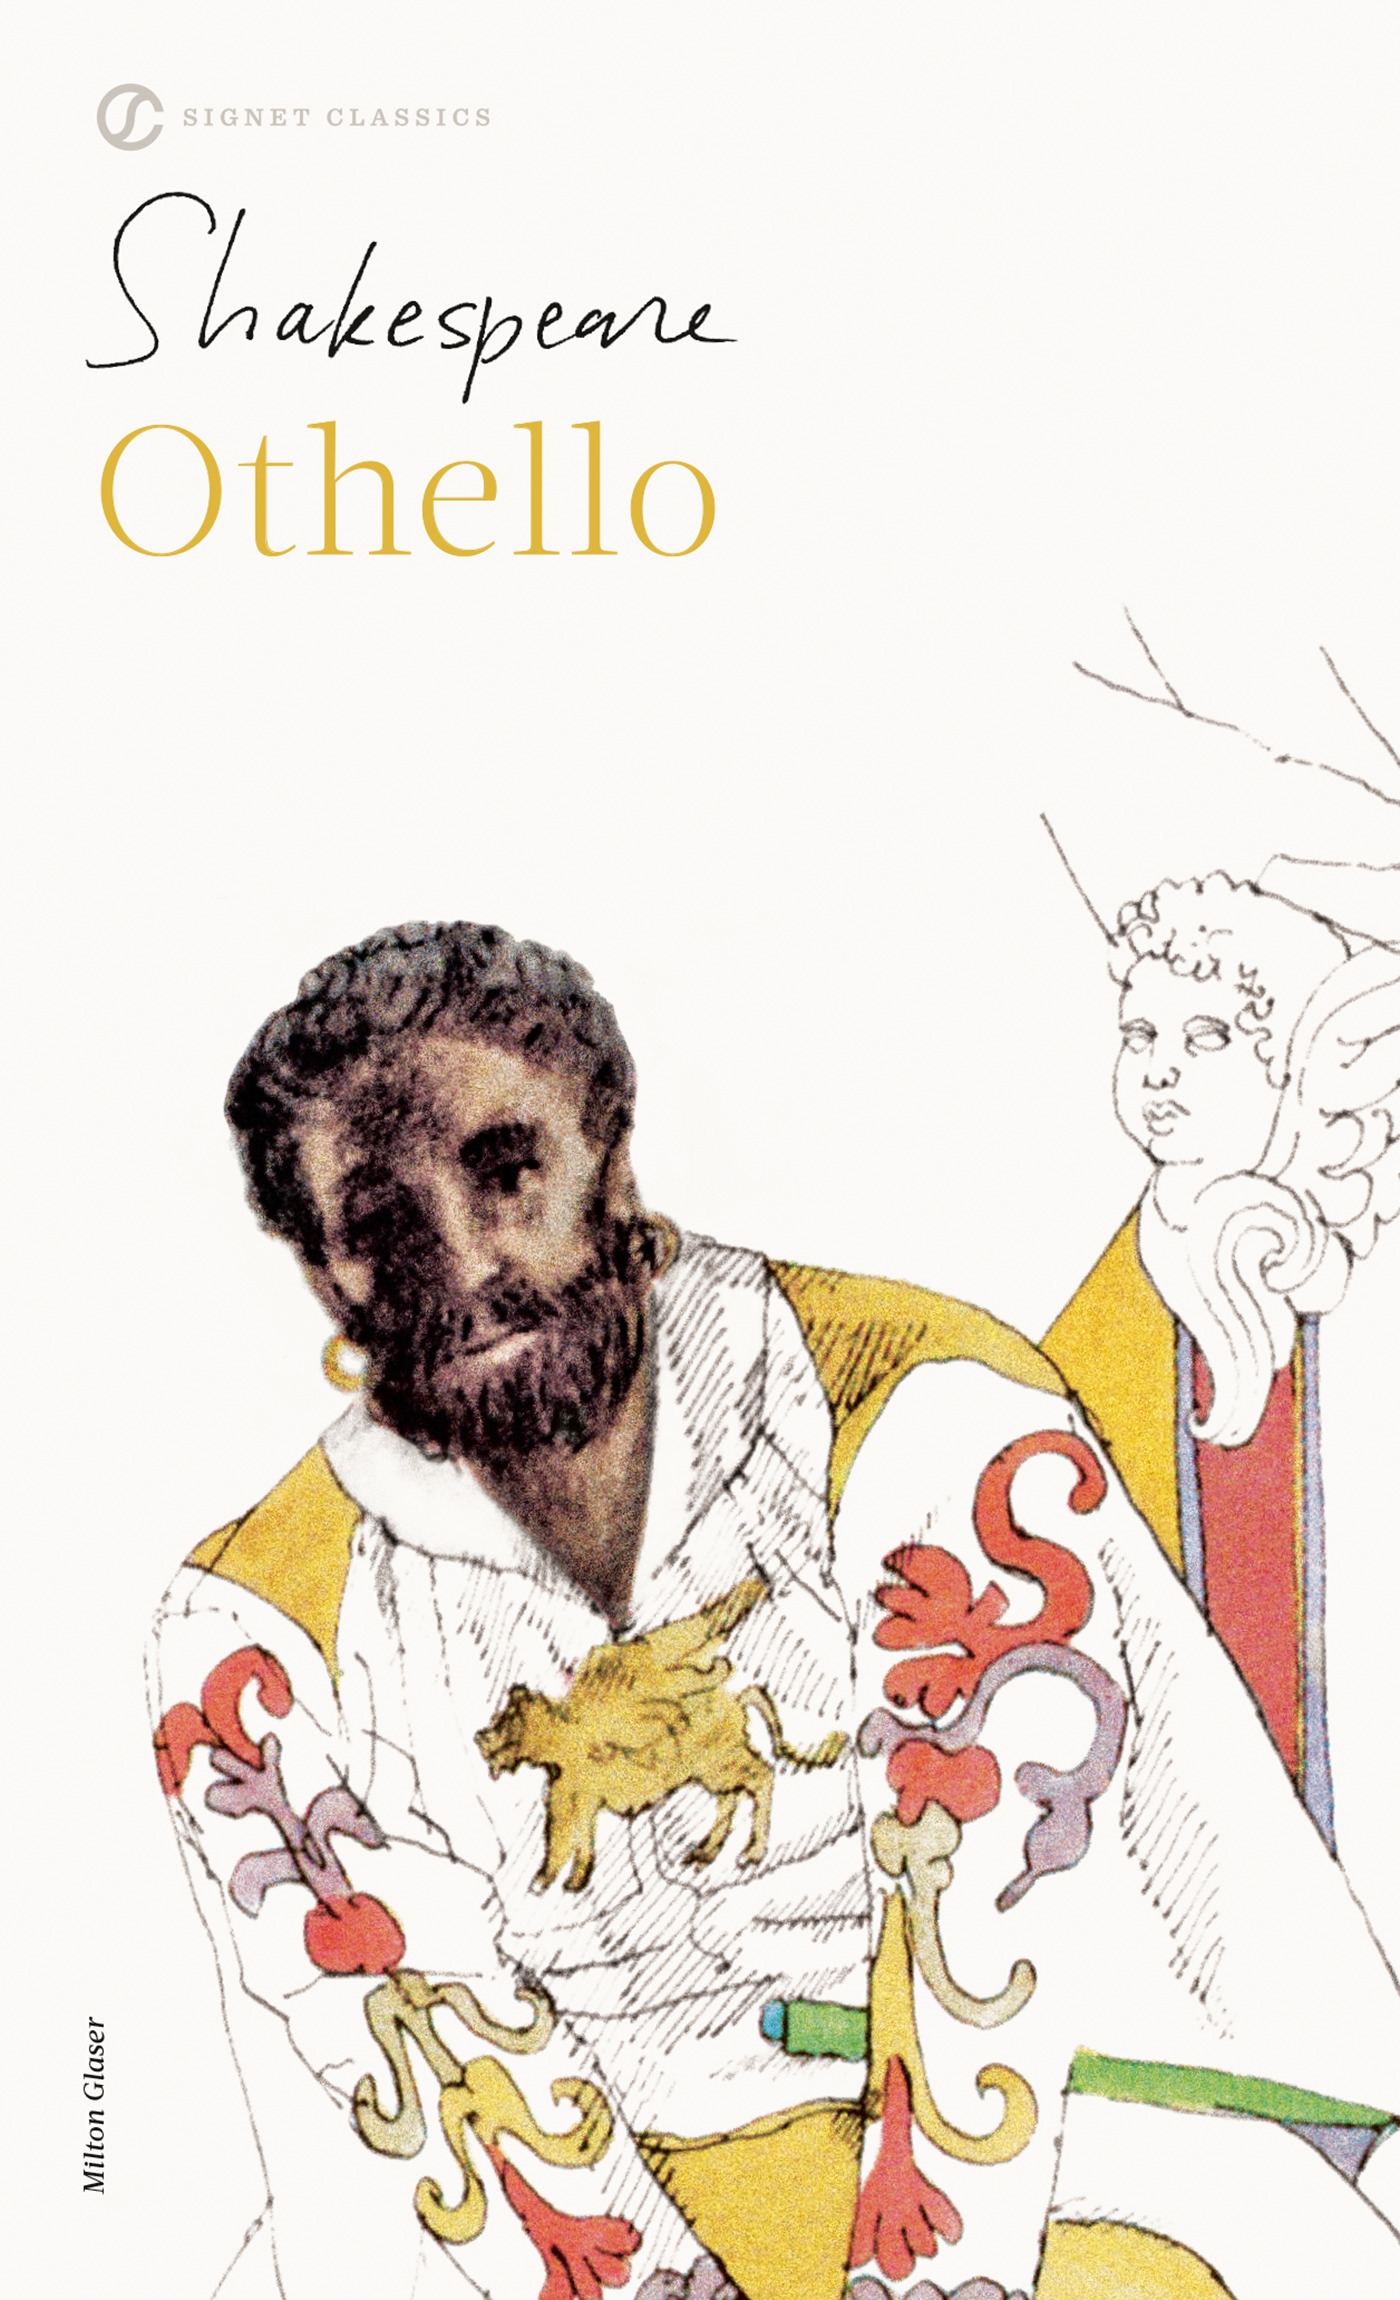 book review on othello